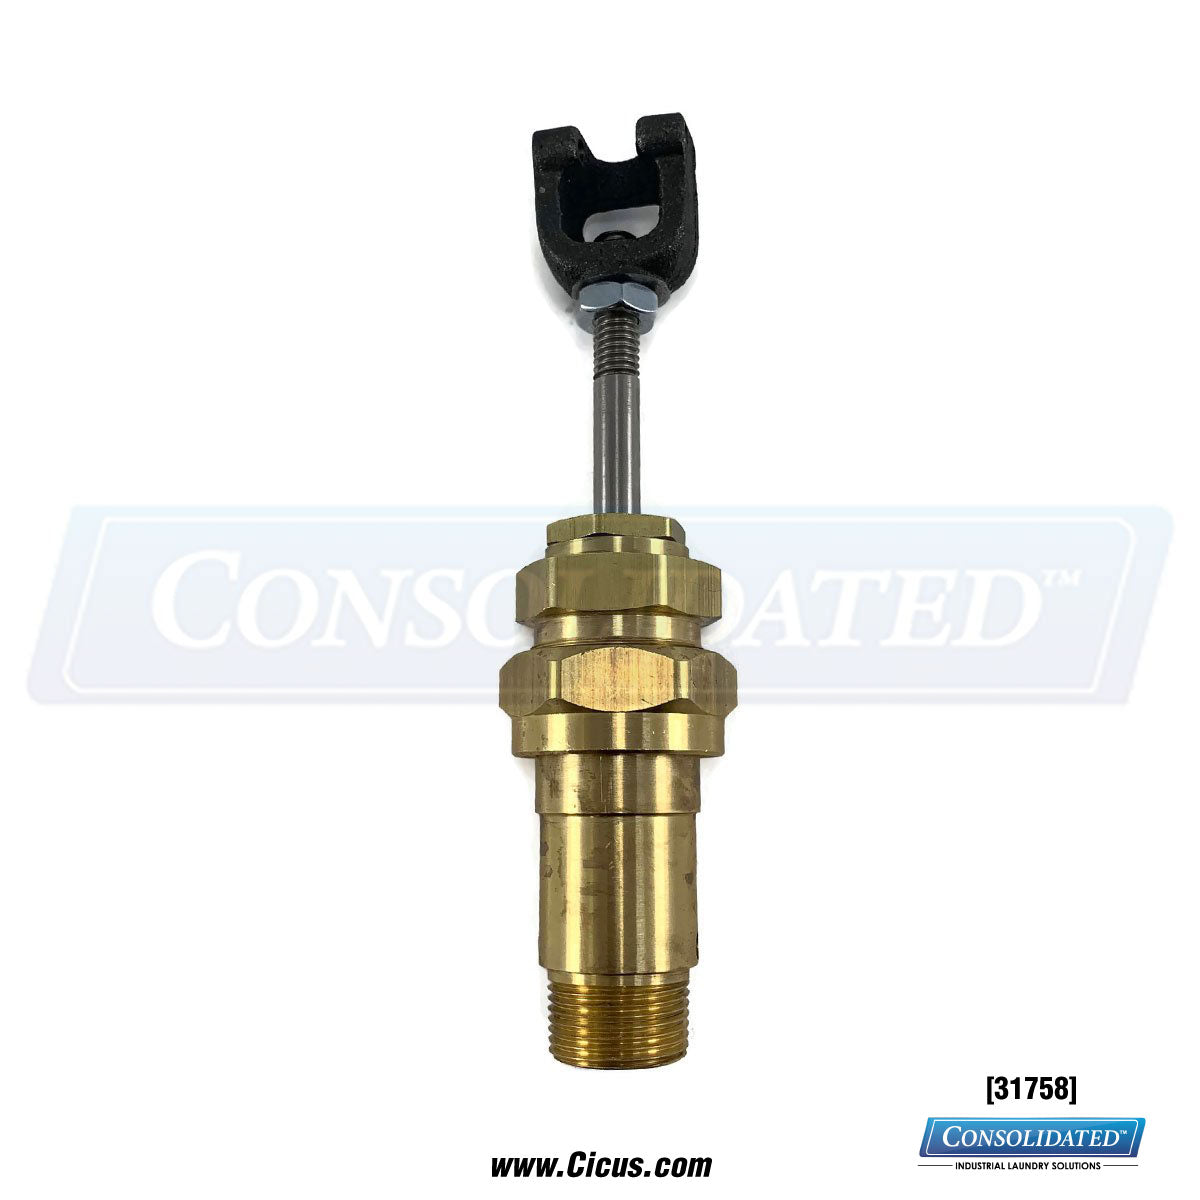 Forenta Buck Steam Tube, 905Hsa [31758] - Frotn View